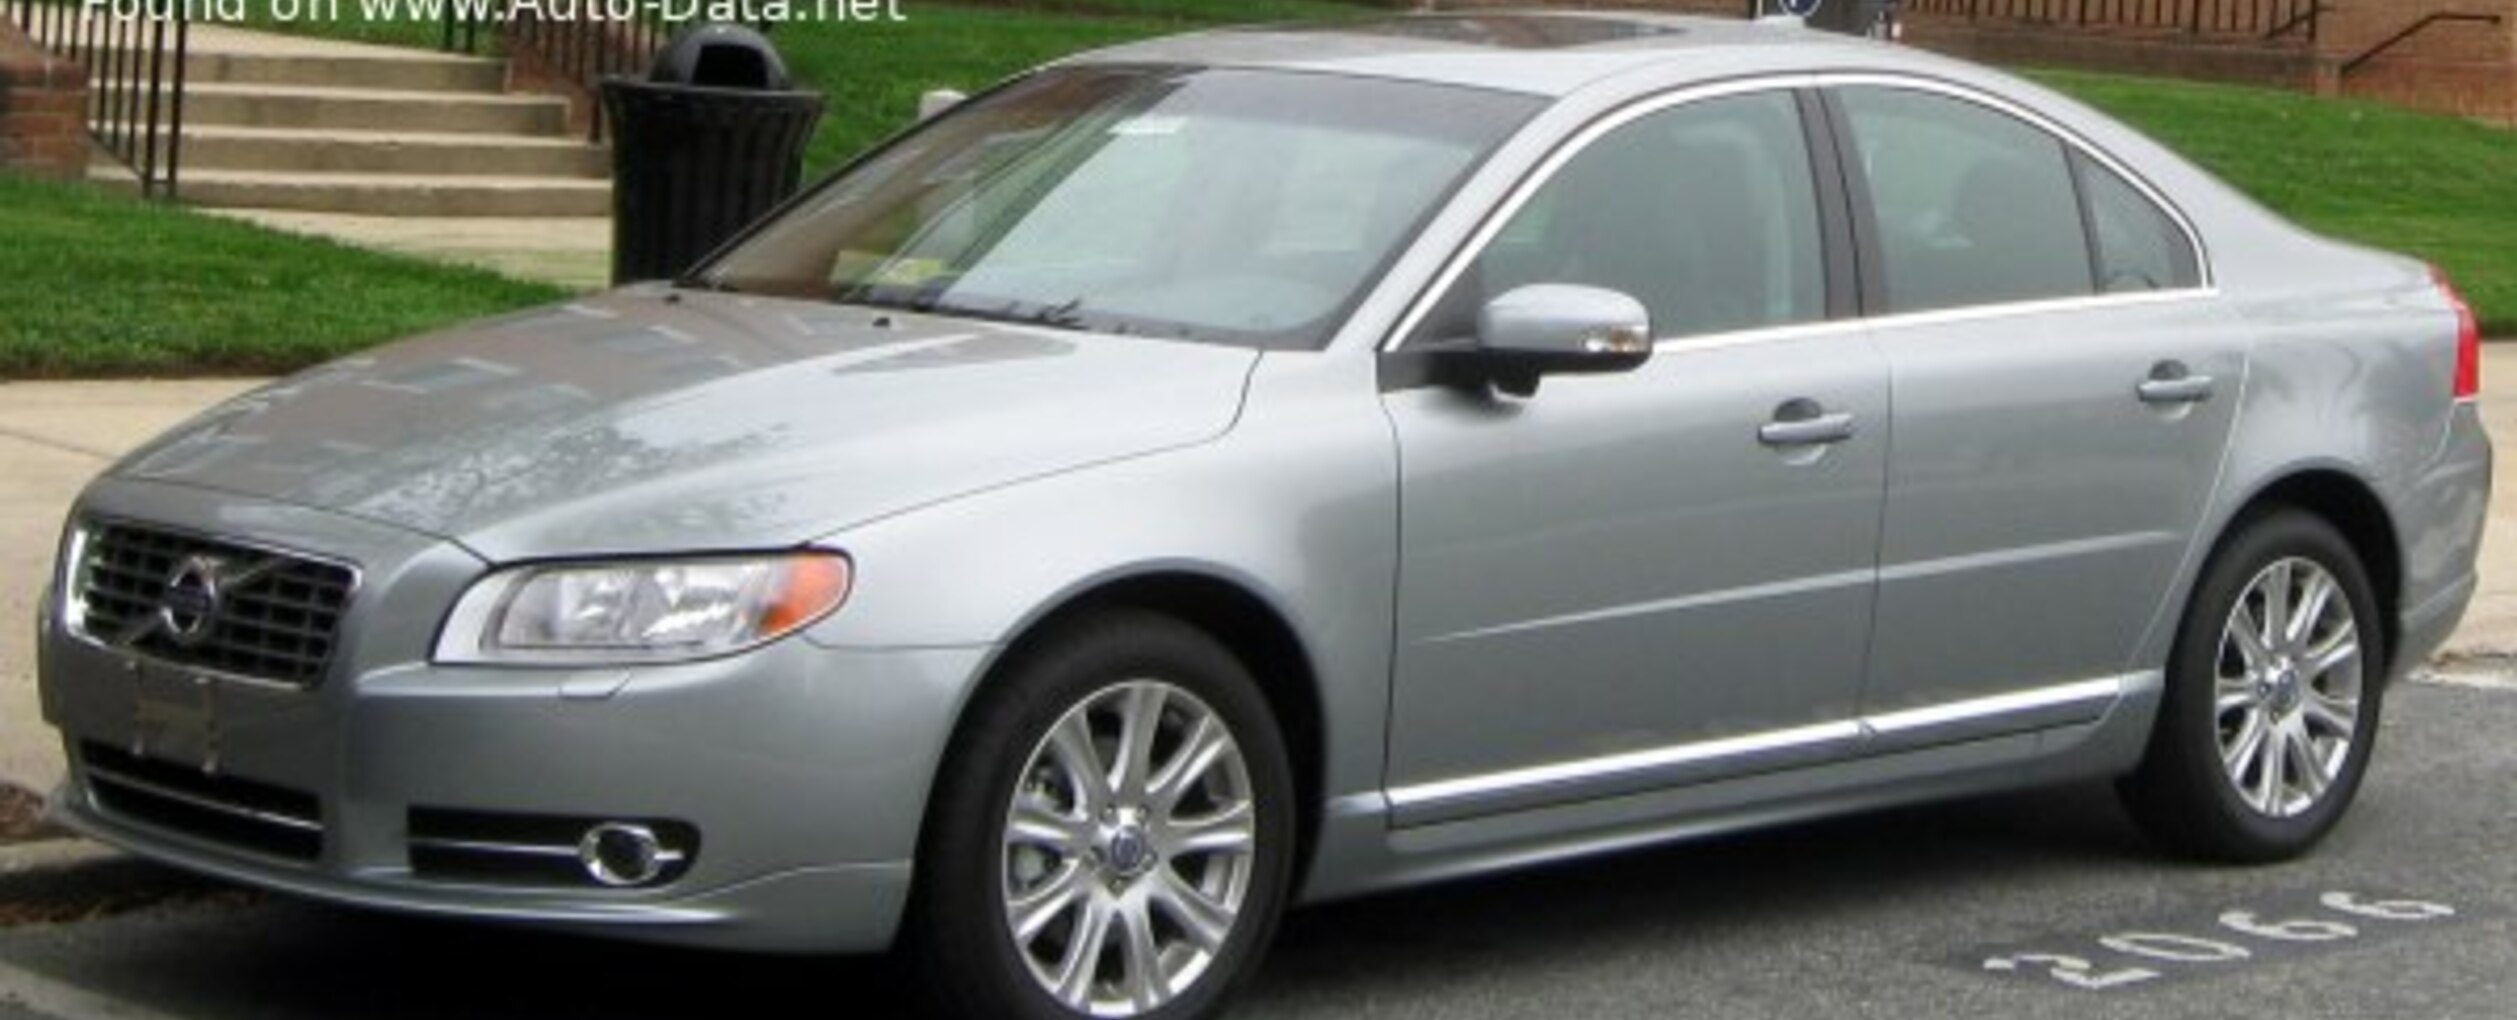 Volvo S80 II (facelift 2009) 2.4 D5 (205 Hp) Automatic 2009, 2010, 2011 